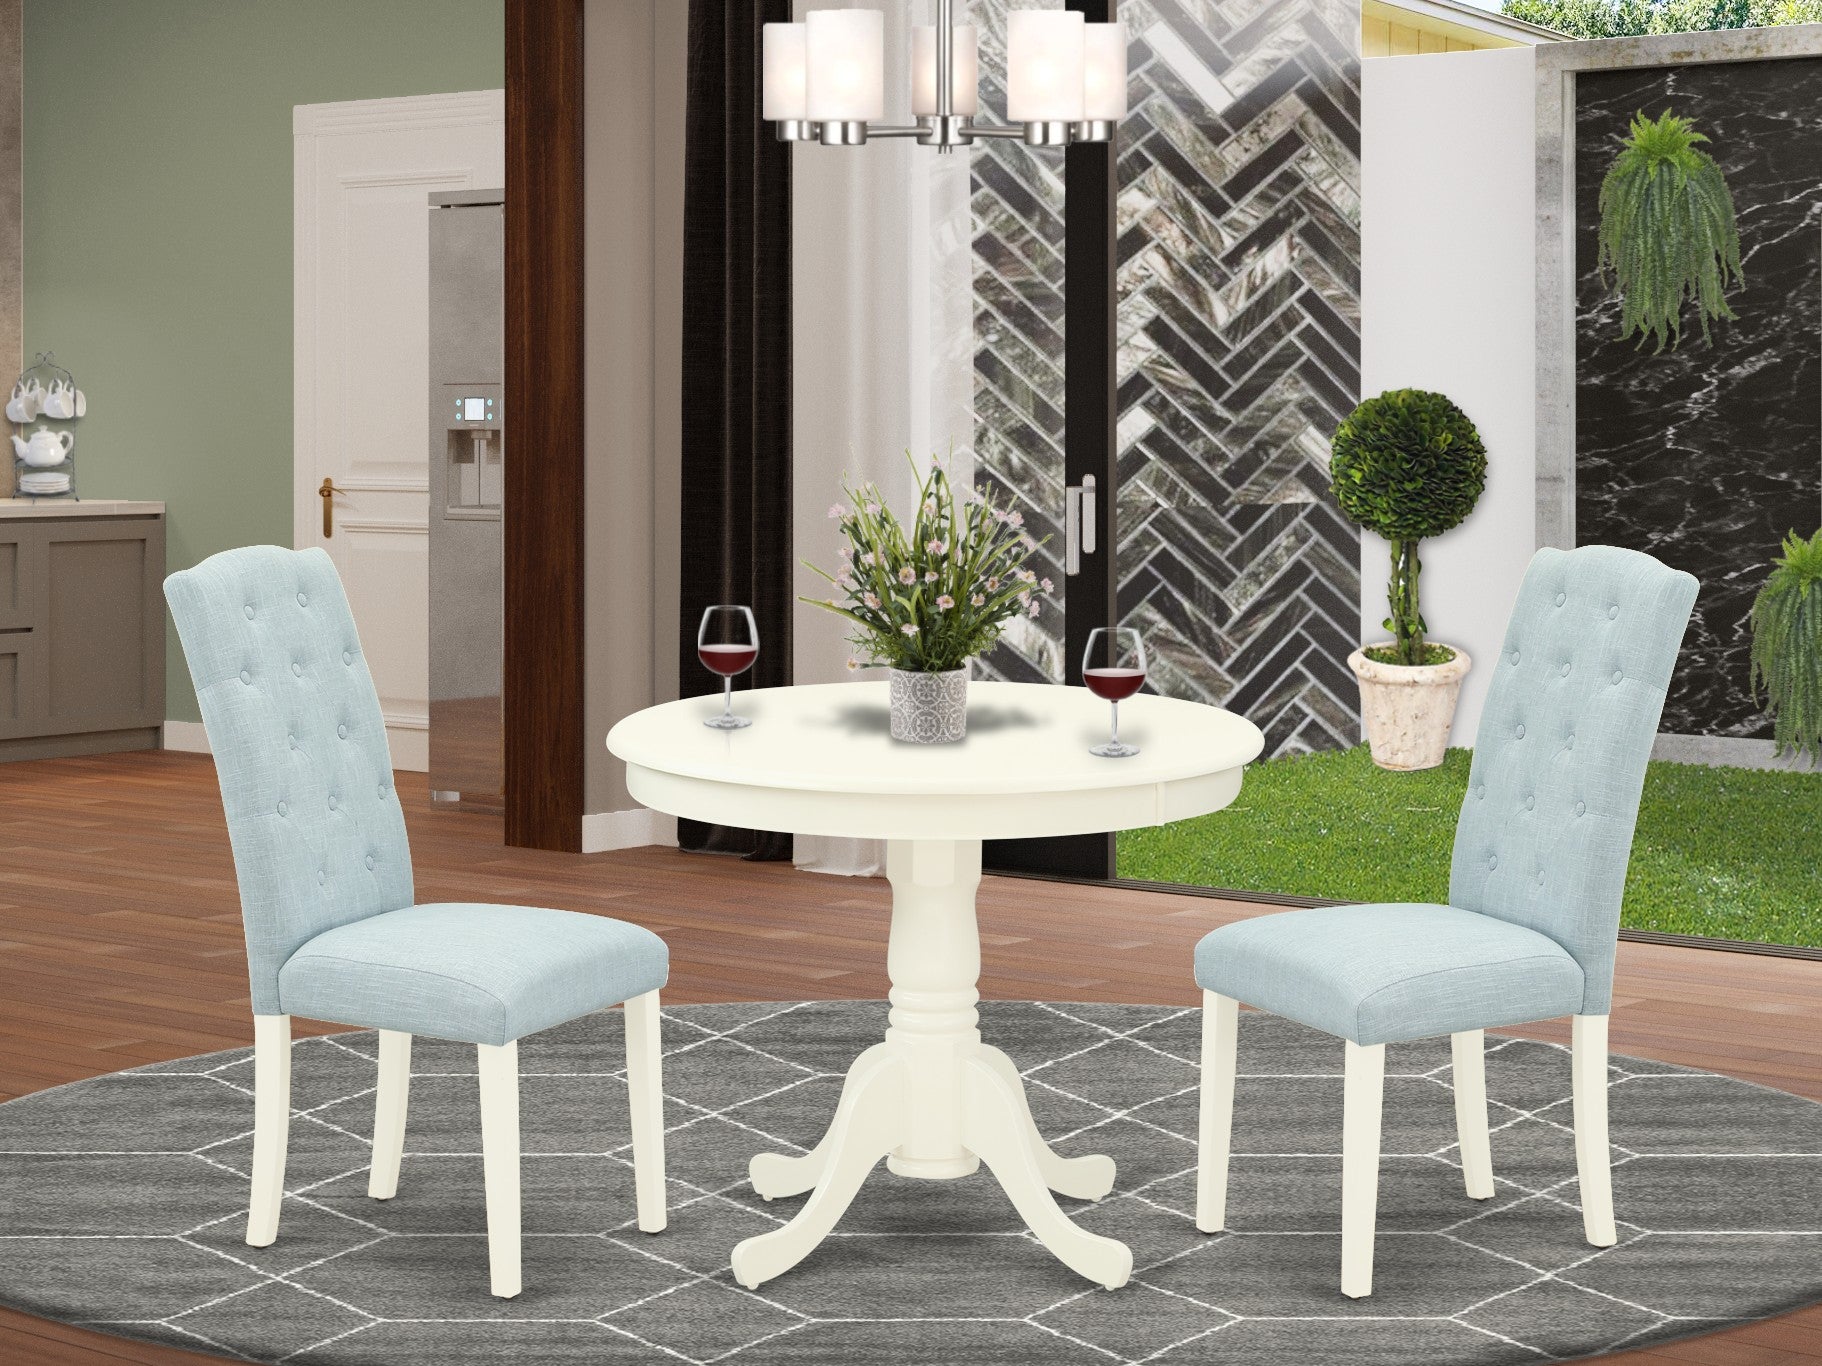 ANCE3-LWH-15 3Pc Dinette Set Includes a Small Rounded Kitchen Table and Two Parson Chairs with Baby Blue Fabric, Linen White Finish